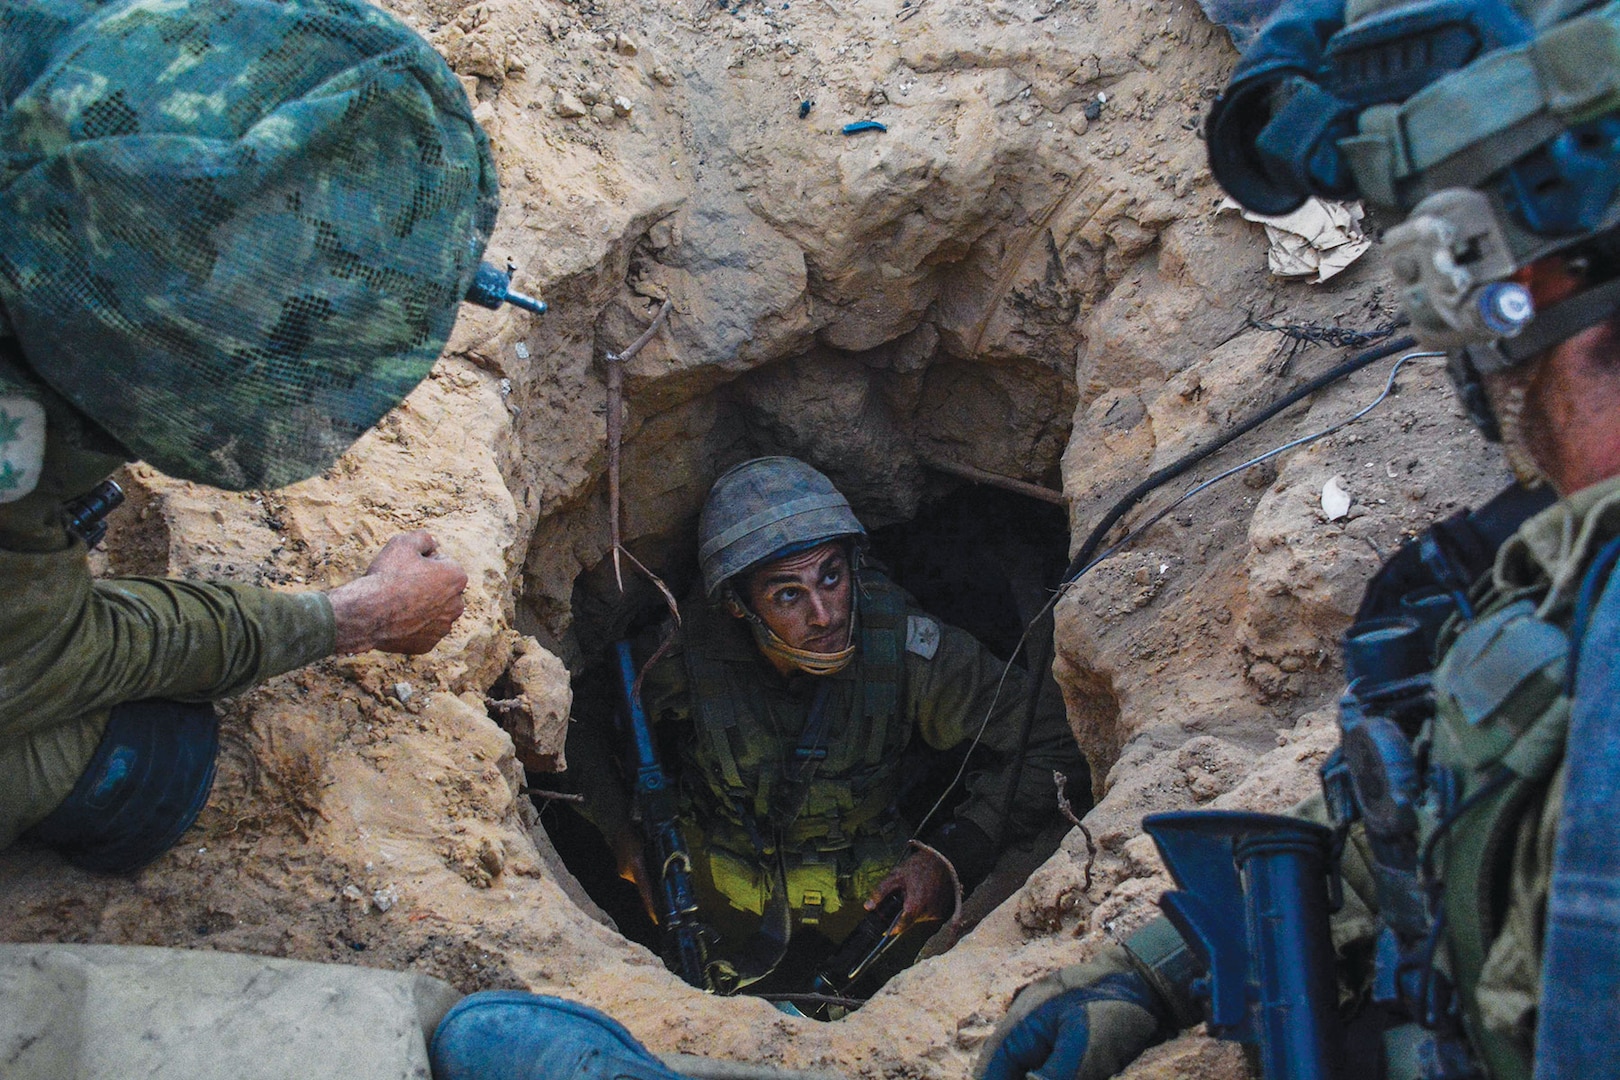 The IDF’s paratroopers brigade operate within the Gaza Strip to find and disable Hamas’ network terror tunnels and eliminate their threat to Israeli civilians. (Israel Defense Forces, 20 July 2014)